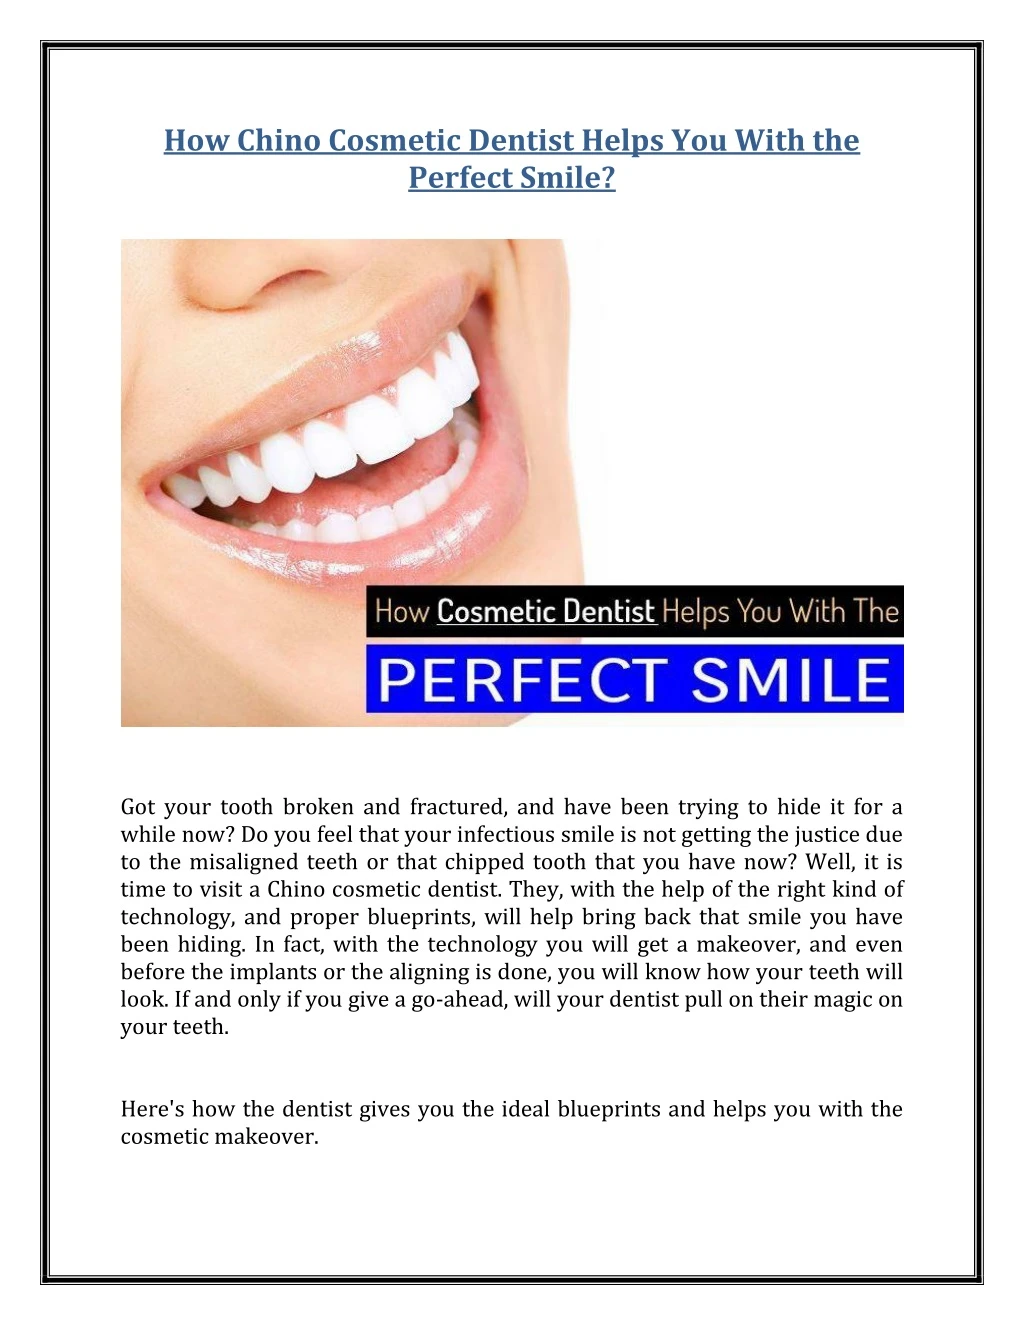 how chino cosmetic dentist helps you with